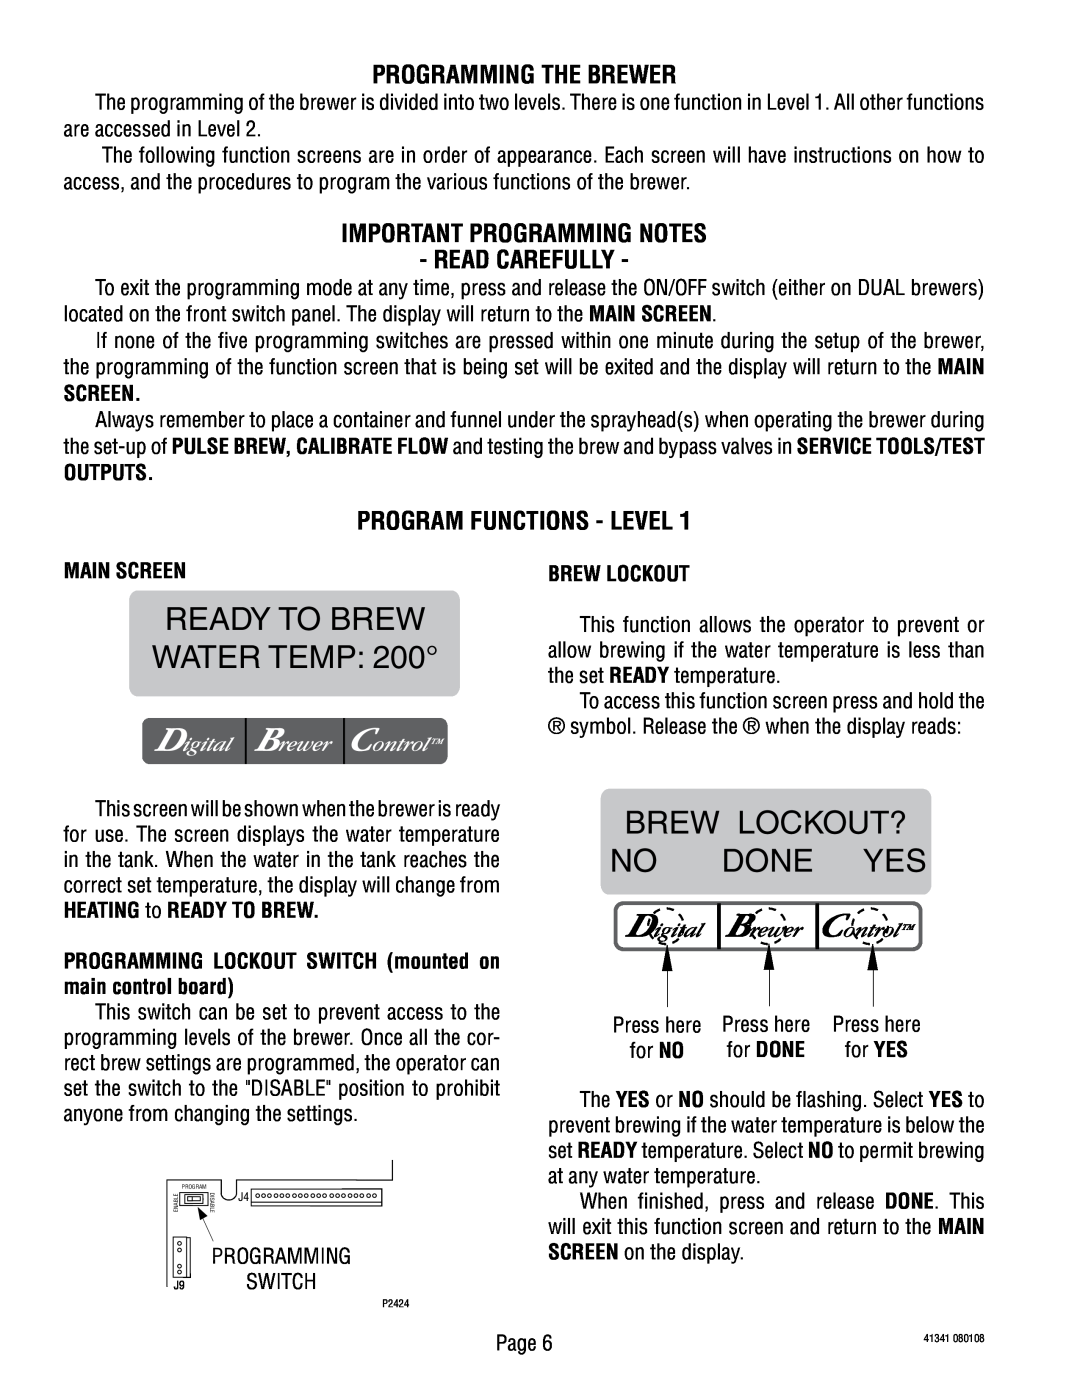 Bunn SNG0033000 Programming The Brewer, Important Programming Notes Read Carefully, Program Functions - Level, Screen 